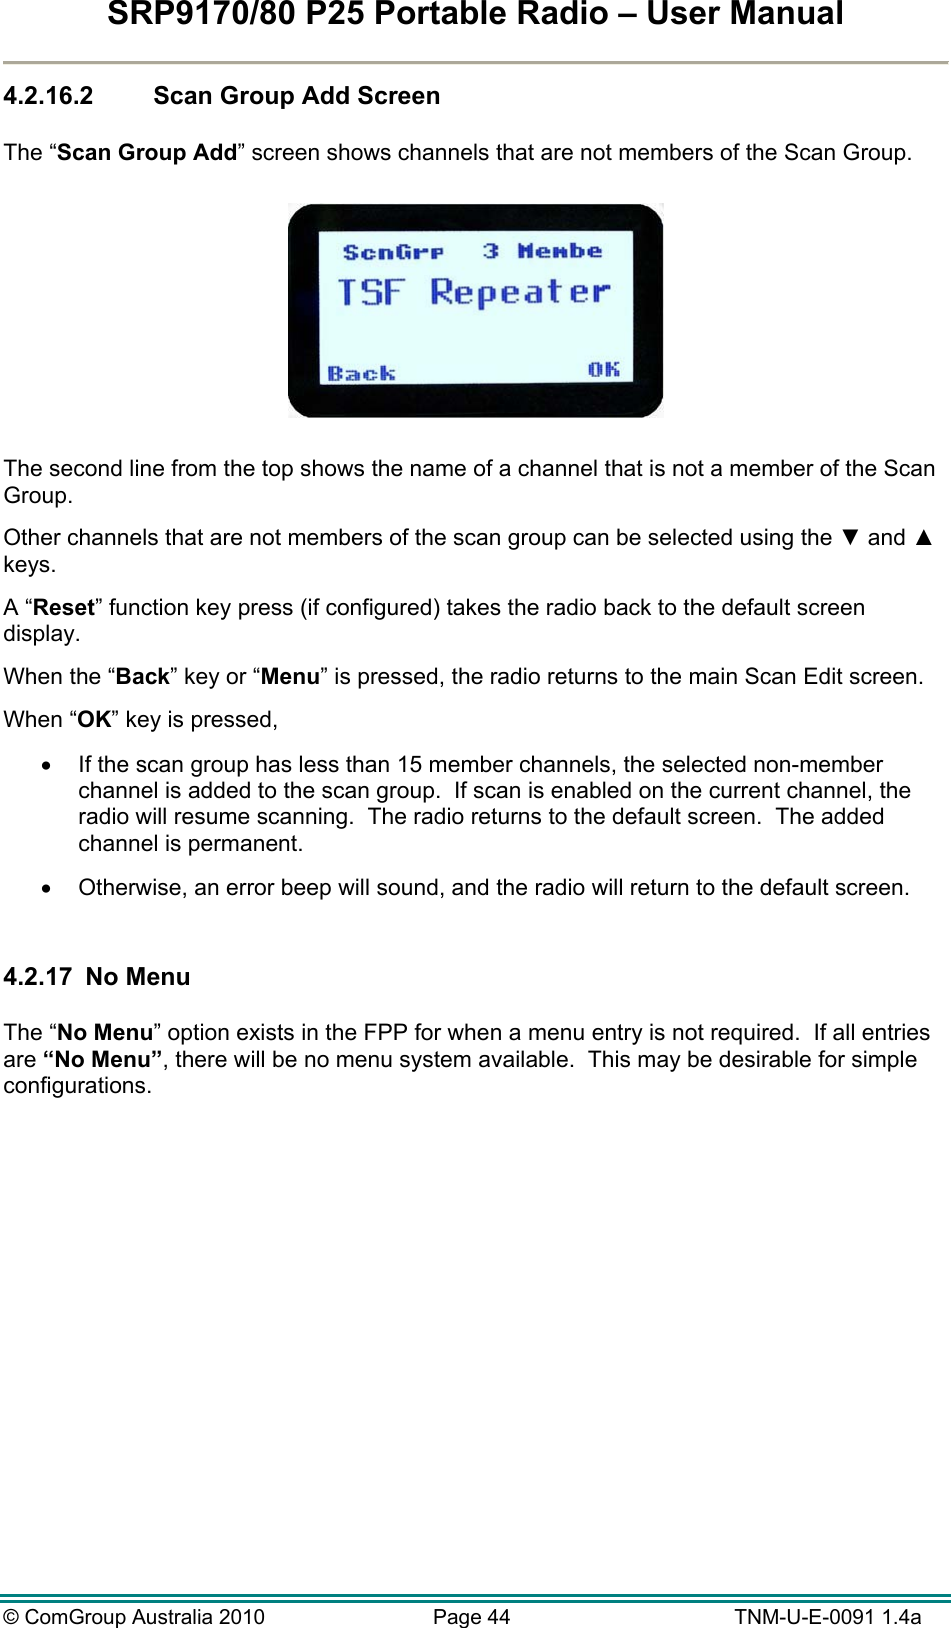 SRP9170/80 P25 Portable Radio – User Manual  © ComGroup Australia 2010  Page 44   TNM-U-E-0091 1.4a 4.2.16.2  Scan Group Add Screen  The “Scan Group Add” screen shows channels that are not members of the Scan Group.      The second line from the top shows the name of a channel that is not a member of the Scan Group.   Other channels that are not members of the scan group can be selected using the ▼ and ▲ keys. A “Reset” function key press (if configured) takes the radio back to the default screen display. When the “Back” key or “Menu” is pressed, the radio returns to the main Scan Edit screen. When “OK” key is pressed,    If the scan group has less than 15 member channels, the selected non-member channel is added to the scan group.  If scan is enabled on the current channel, the radio will resume scanning.  The radio returns to the default screen.  The added channel is permanent.   Otherwise, an error beep will sound, and the radio will return to the default screen.  4.2.17  No Menu  The “No Menu” option exists in the FPP for when a menu entry is not required.  If all entries are “No Menu”, there will be no menu system available.  This may be desirable for simple configurations.  